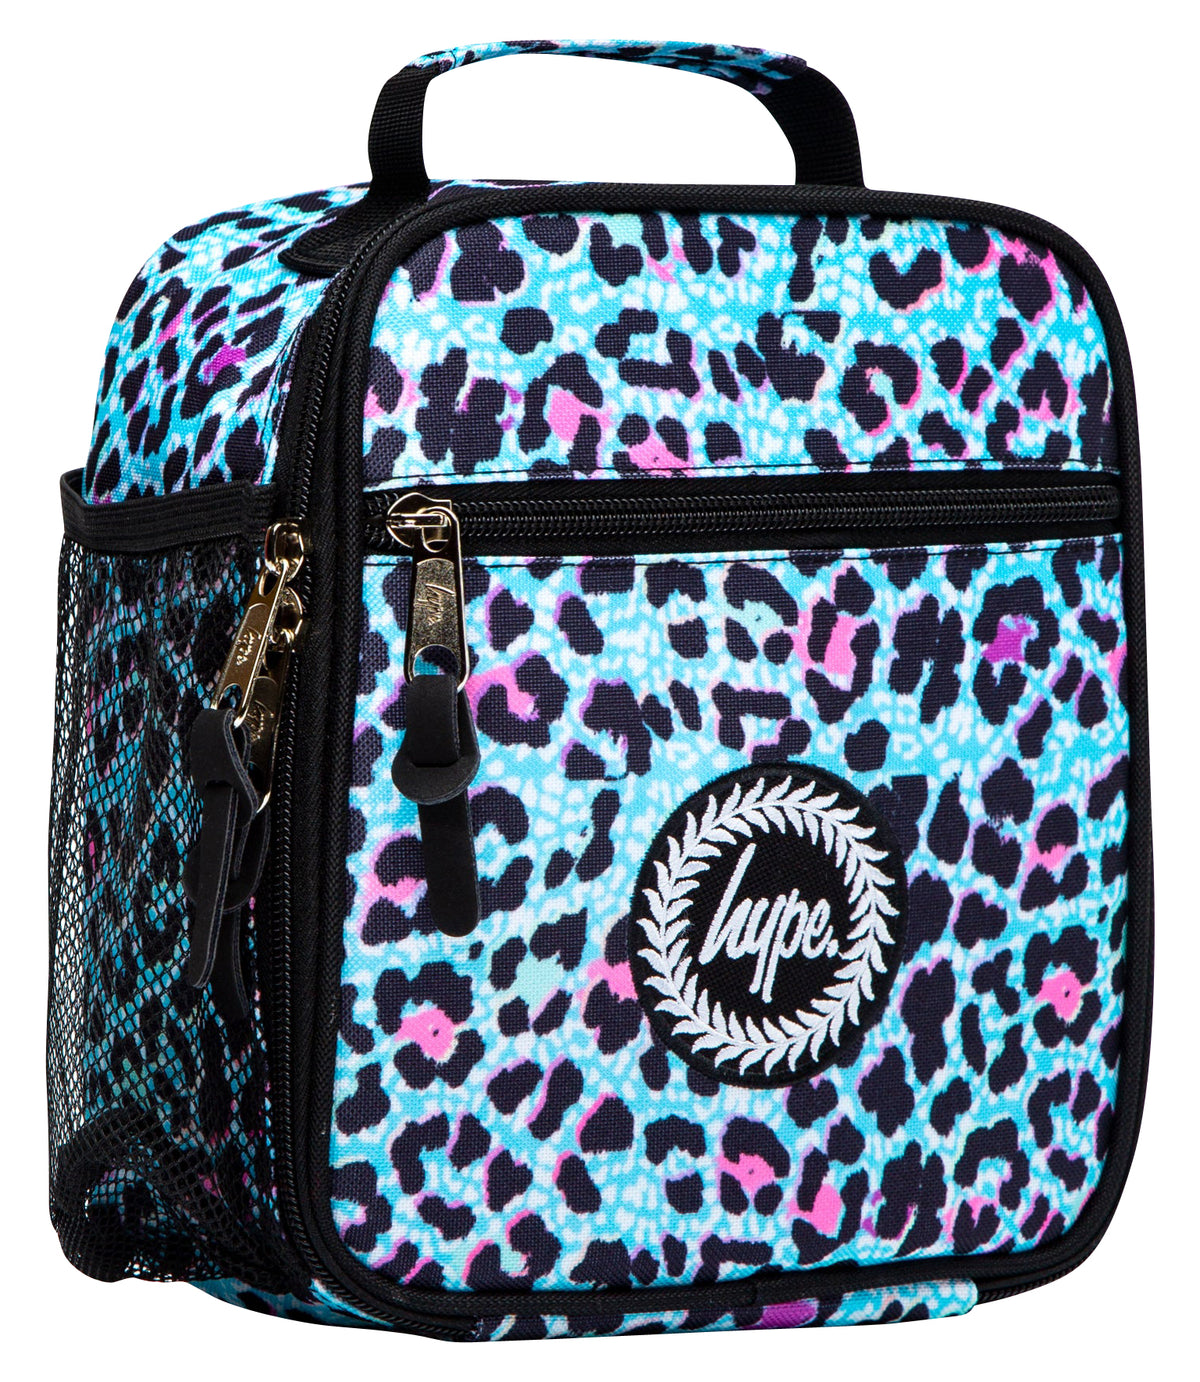 Hype Lunch Bag - Blue Ice Leopard